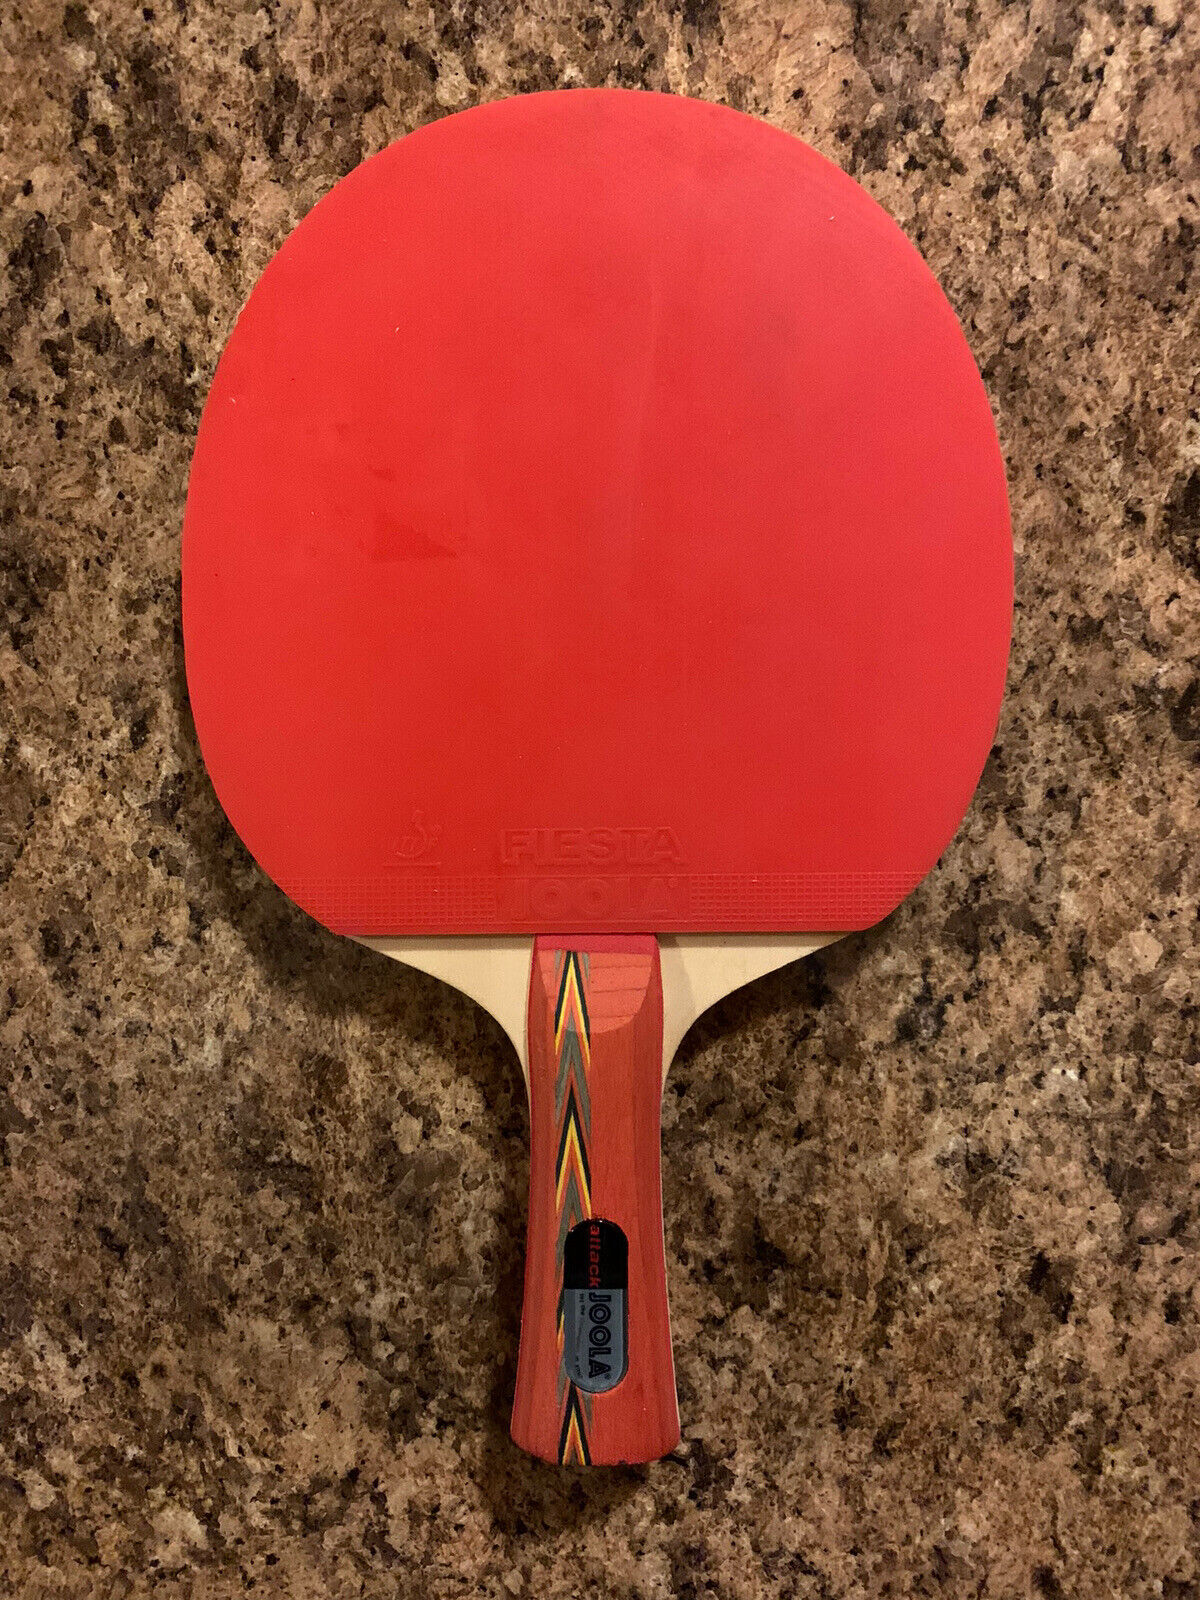 Joola Attack Fiesta Table Tennis Ping Pong Paddle Great Conditio